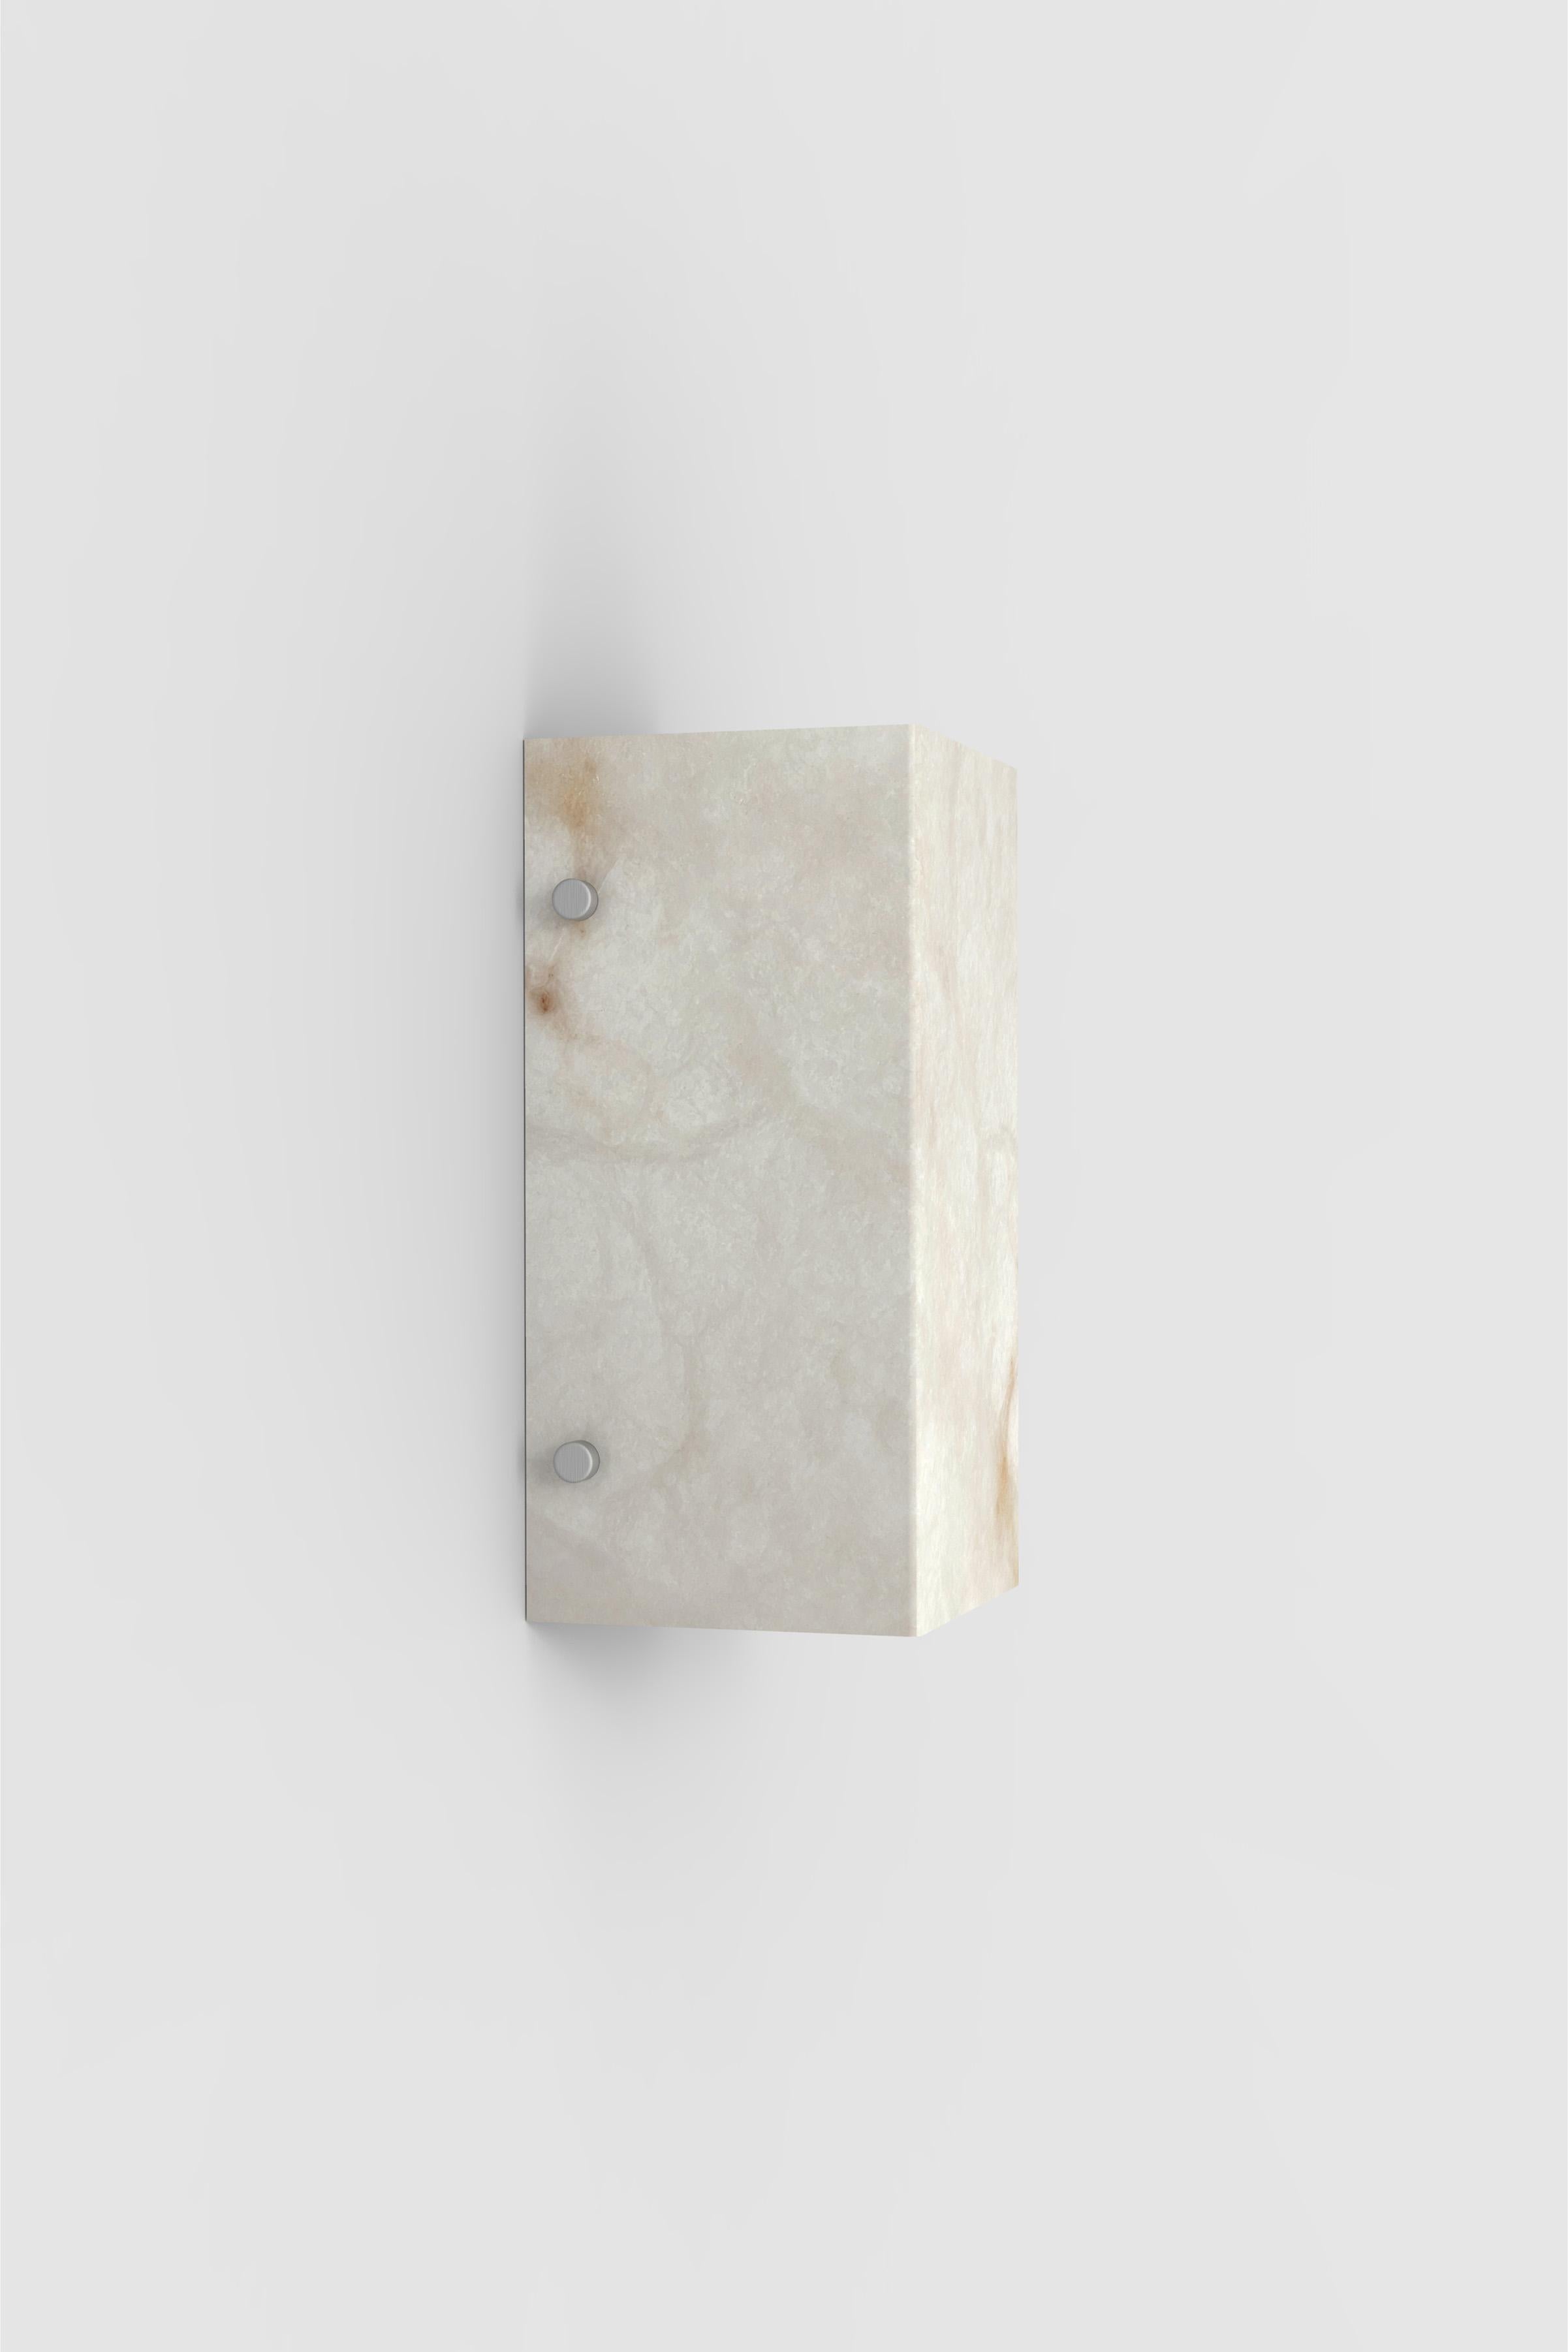 Italian Contemporary Ponti Half Sconce 003A in Alabaster Orphan Work For Sale